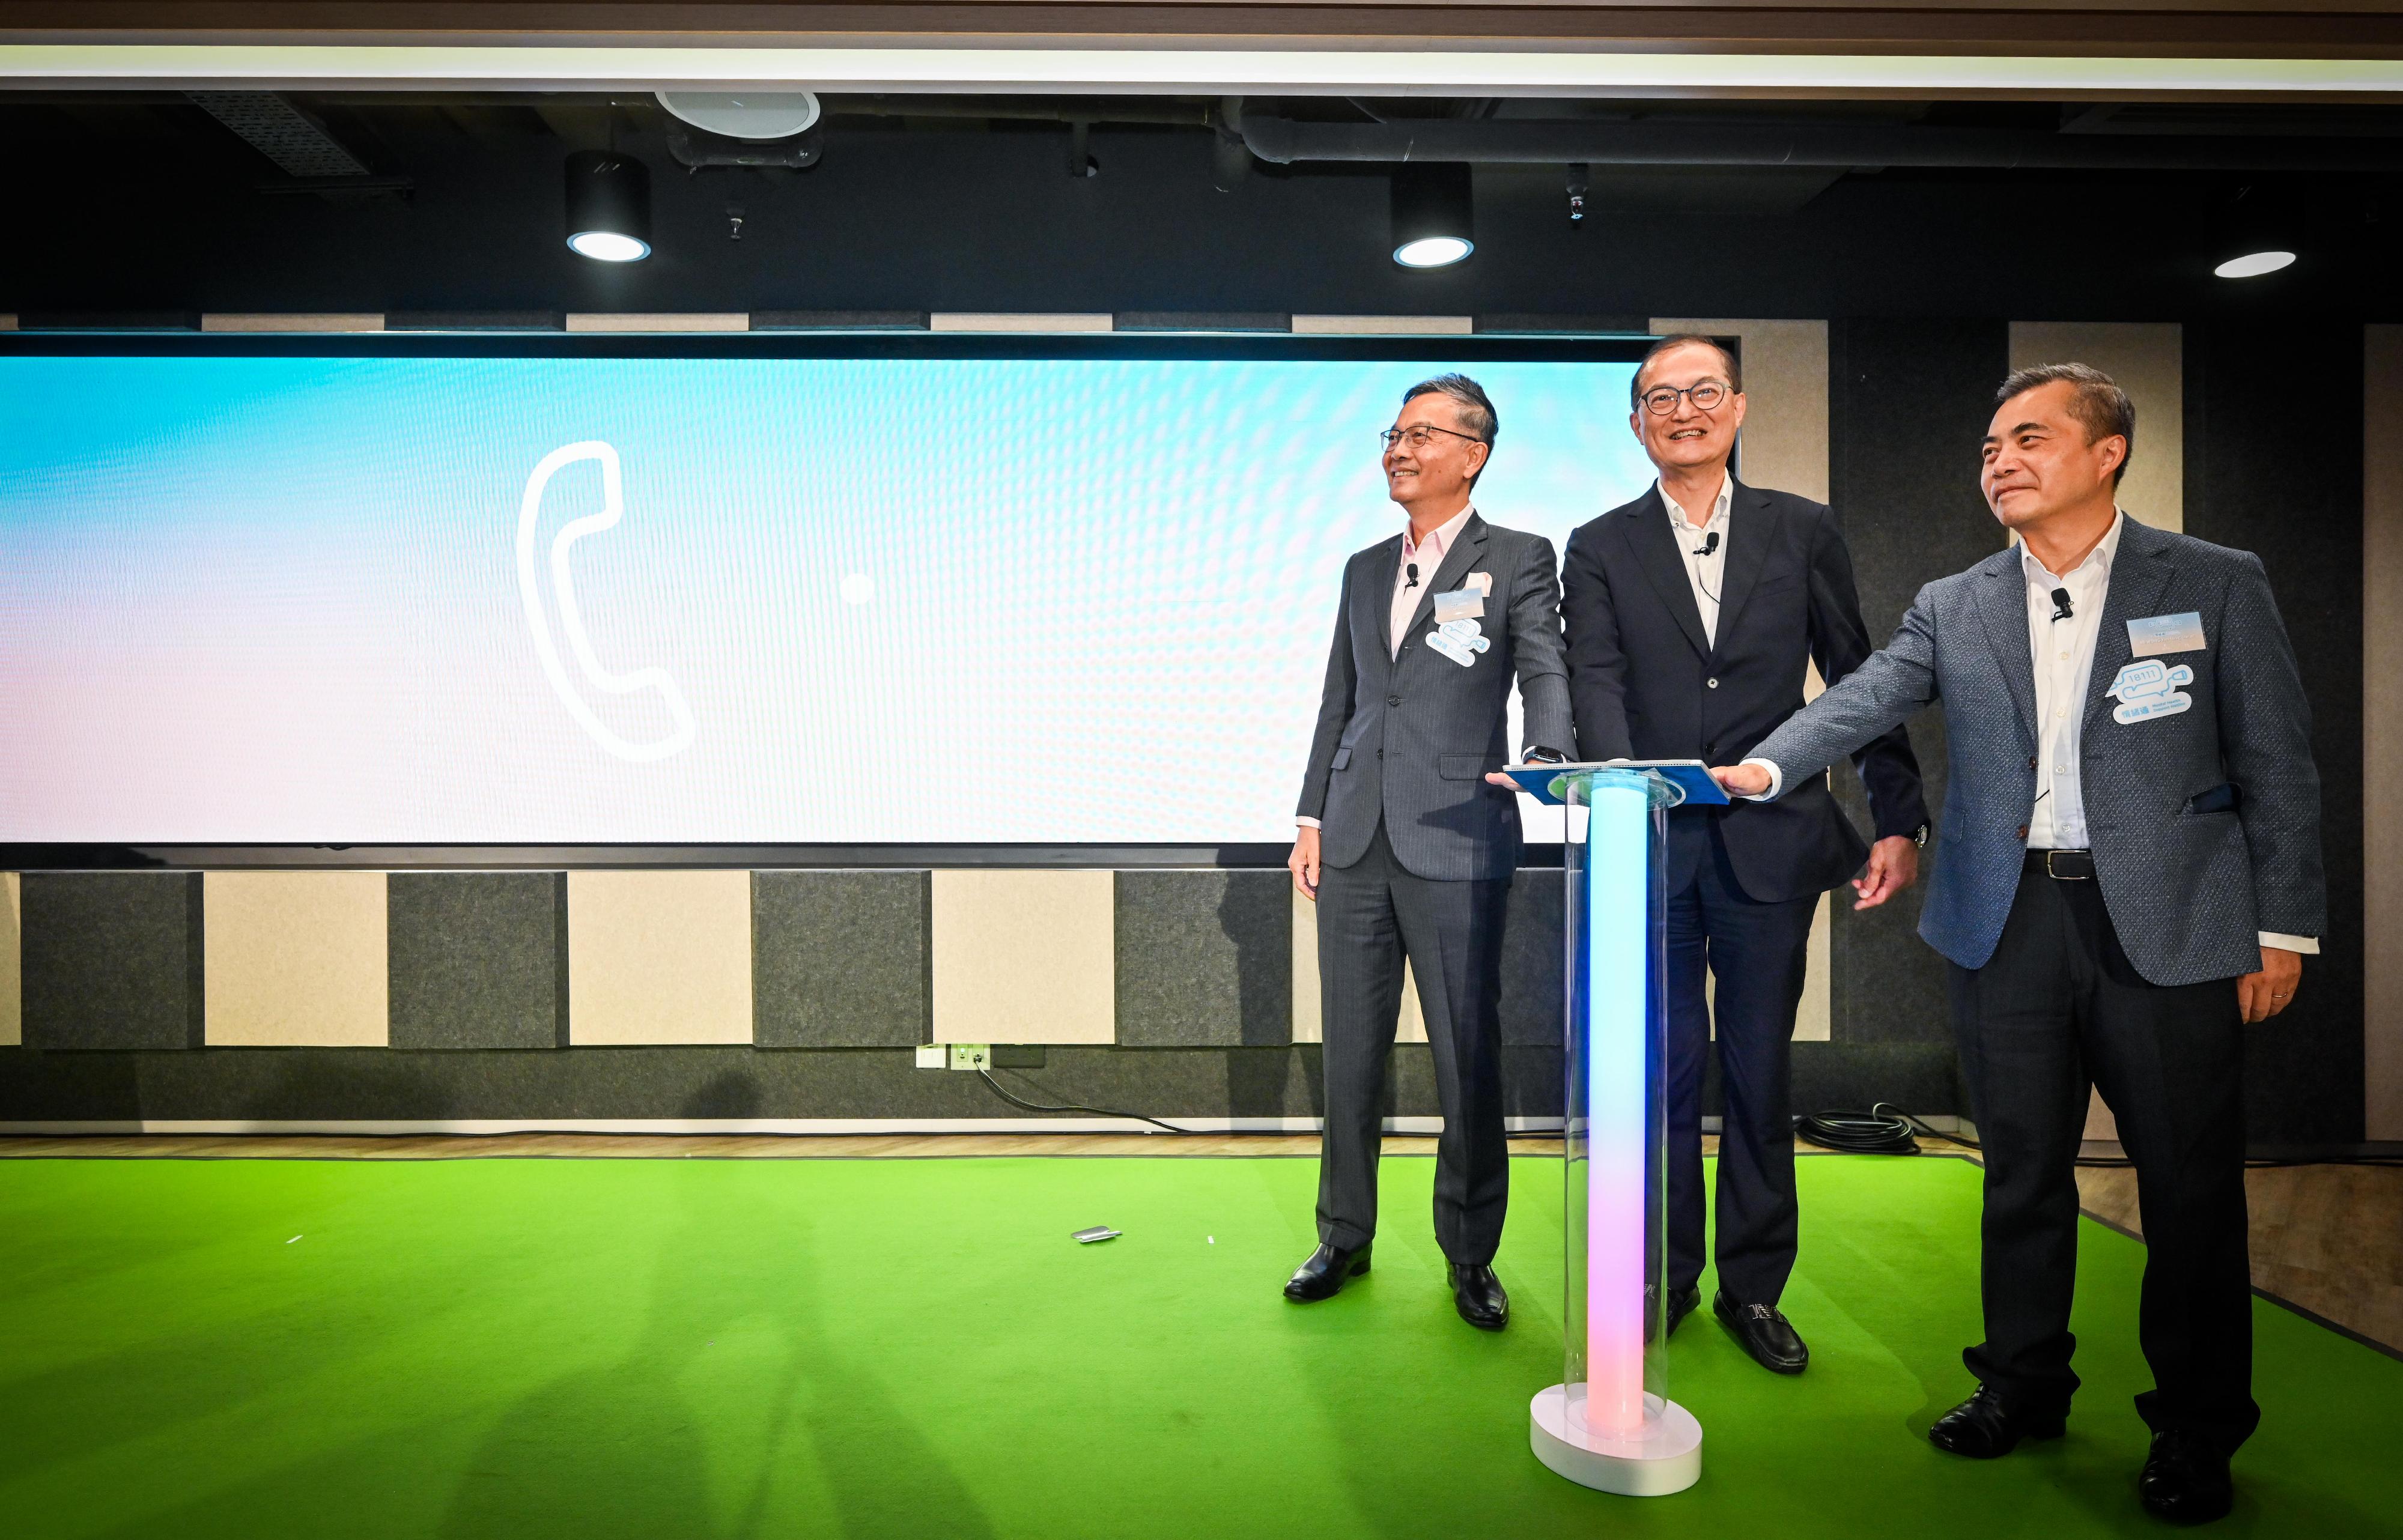 The Secretary for Health, Professor Lo Chung-mau (centre), officiates at the kick-of ceremony of the "18111 - Mental Health Support Hotline" this afternoon (December 27) with the Chairman of the Advisory Committee on Mental Health (ACMH), Dr Lam Ching-choi (left), and former Chairman of the ACMH, Mr Wong Yan-lung, SC (right).